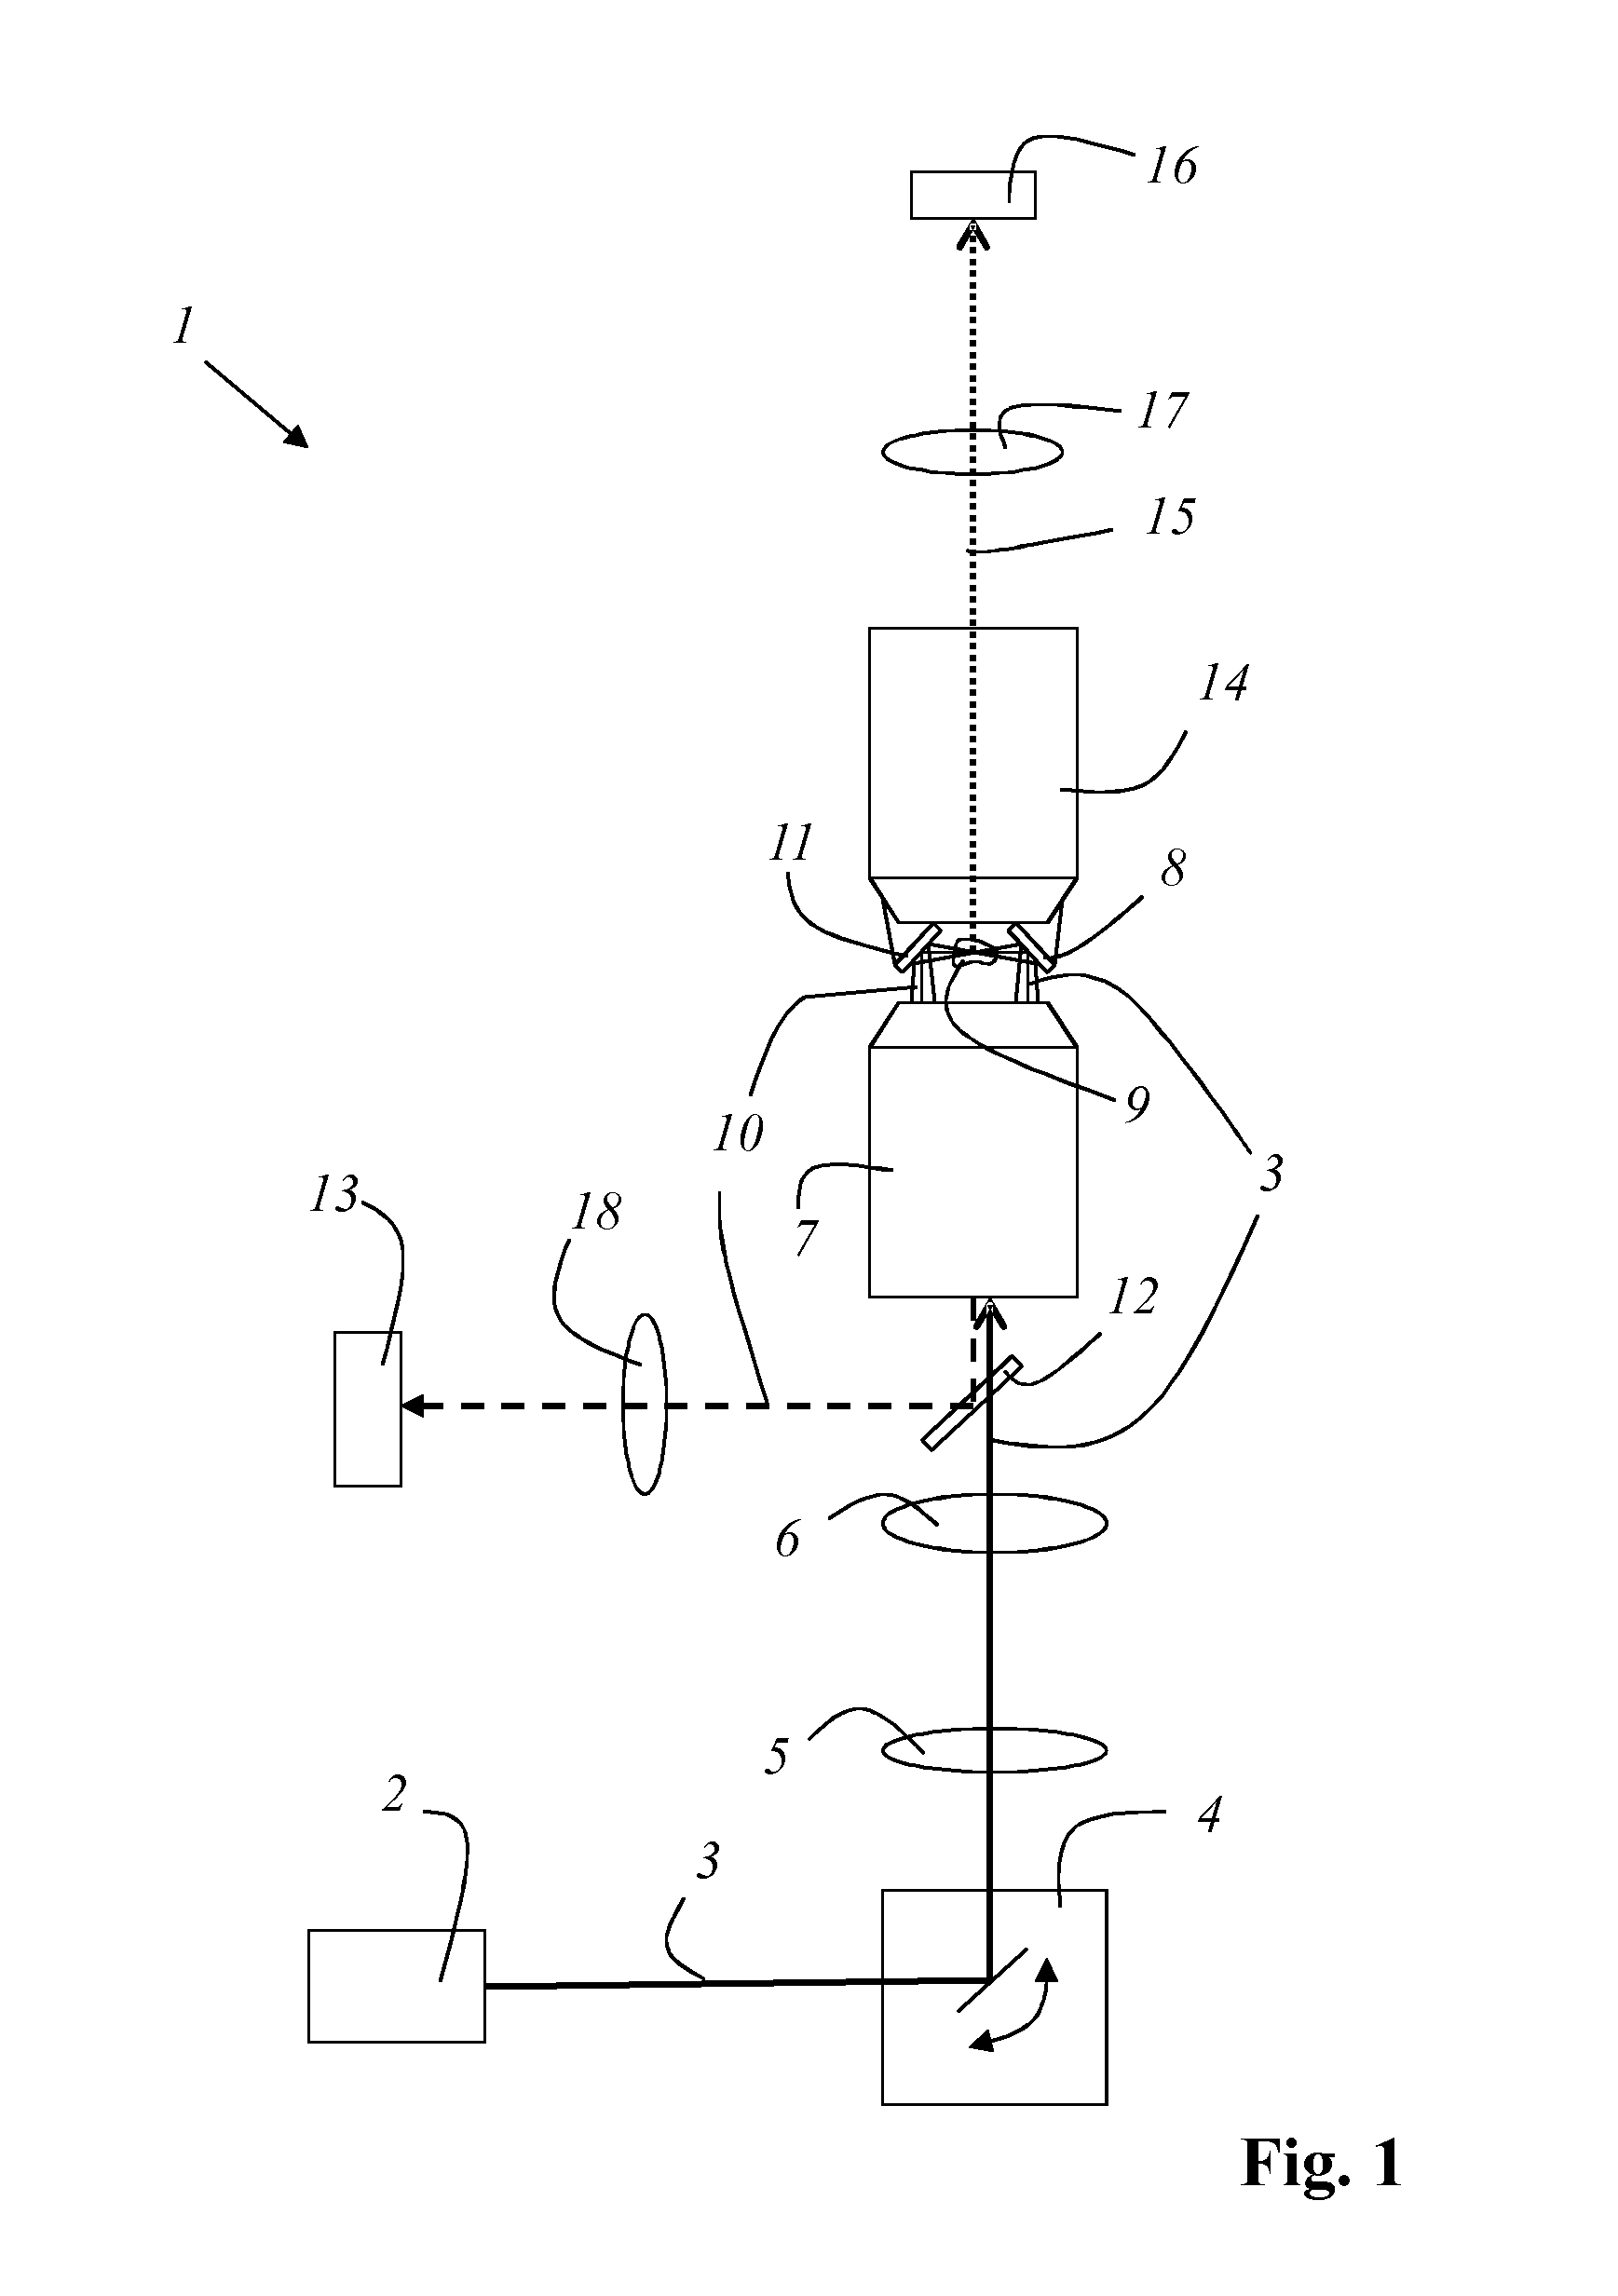 Method and apparatus for investigating a sample by means of optical projection tomography